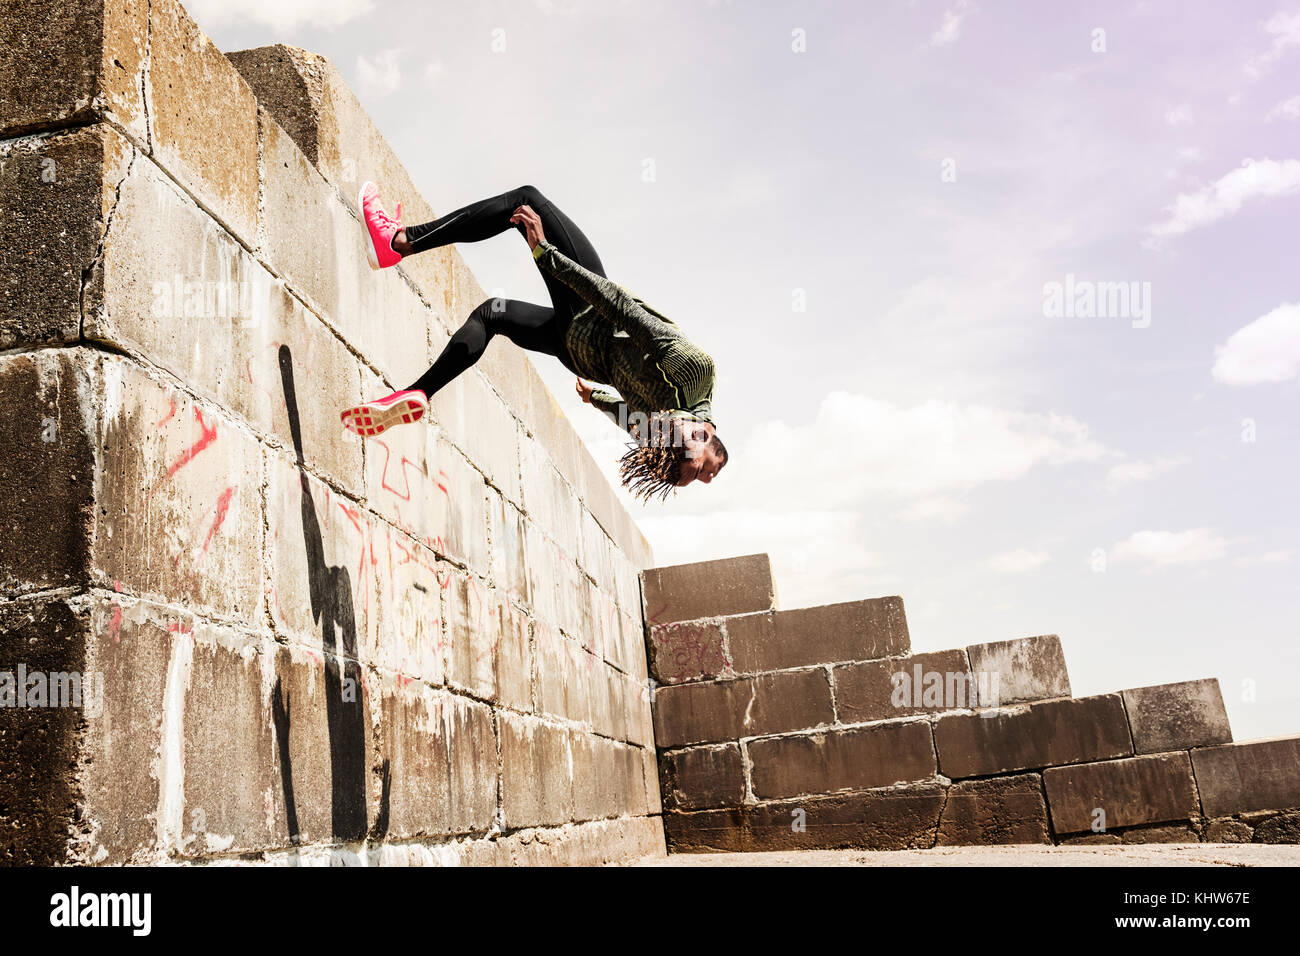 Young man, free running, outdoors, somersaulting from side of wall Stock Photo